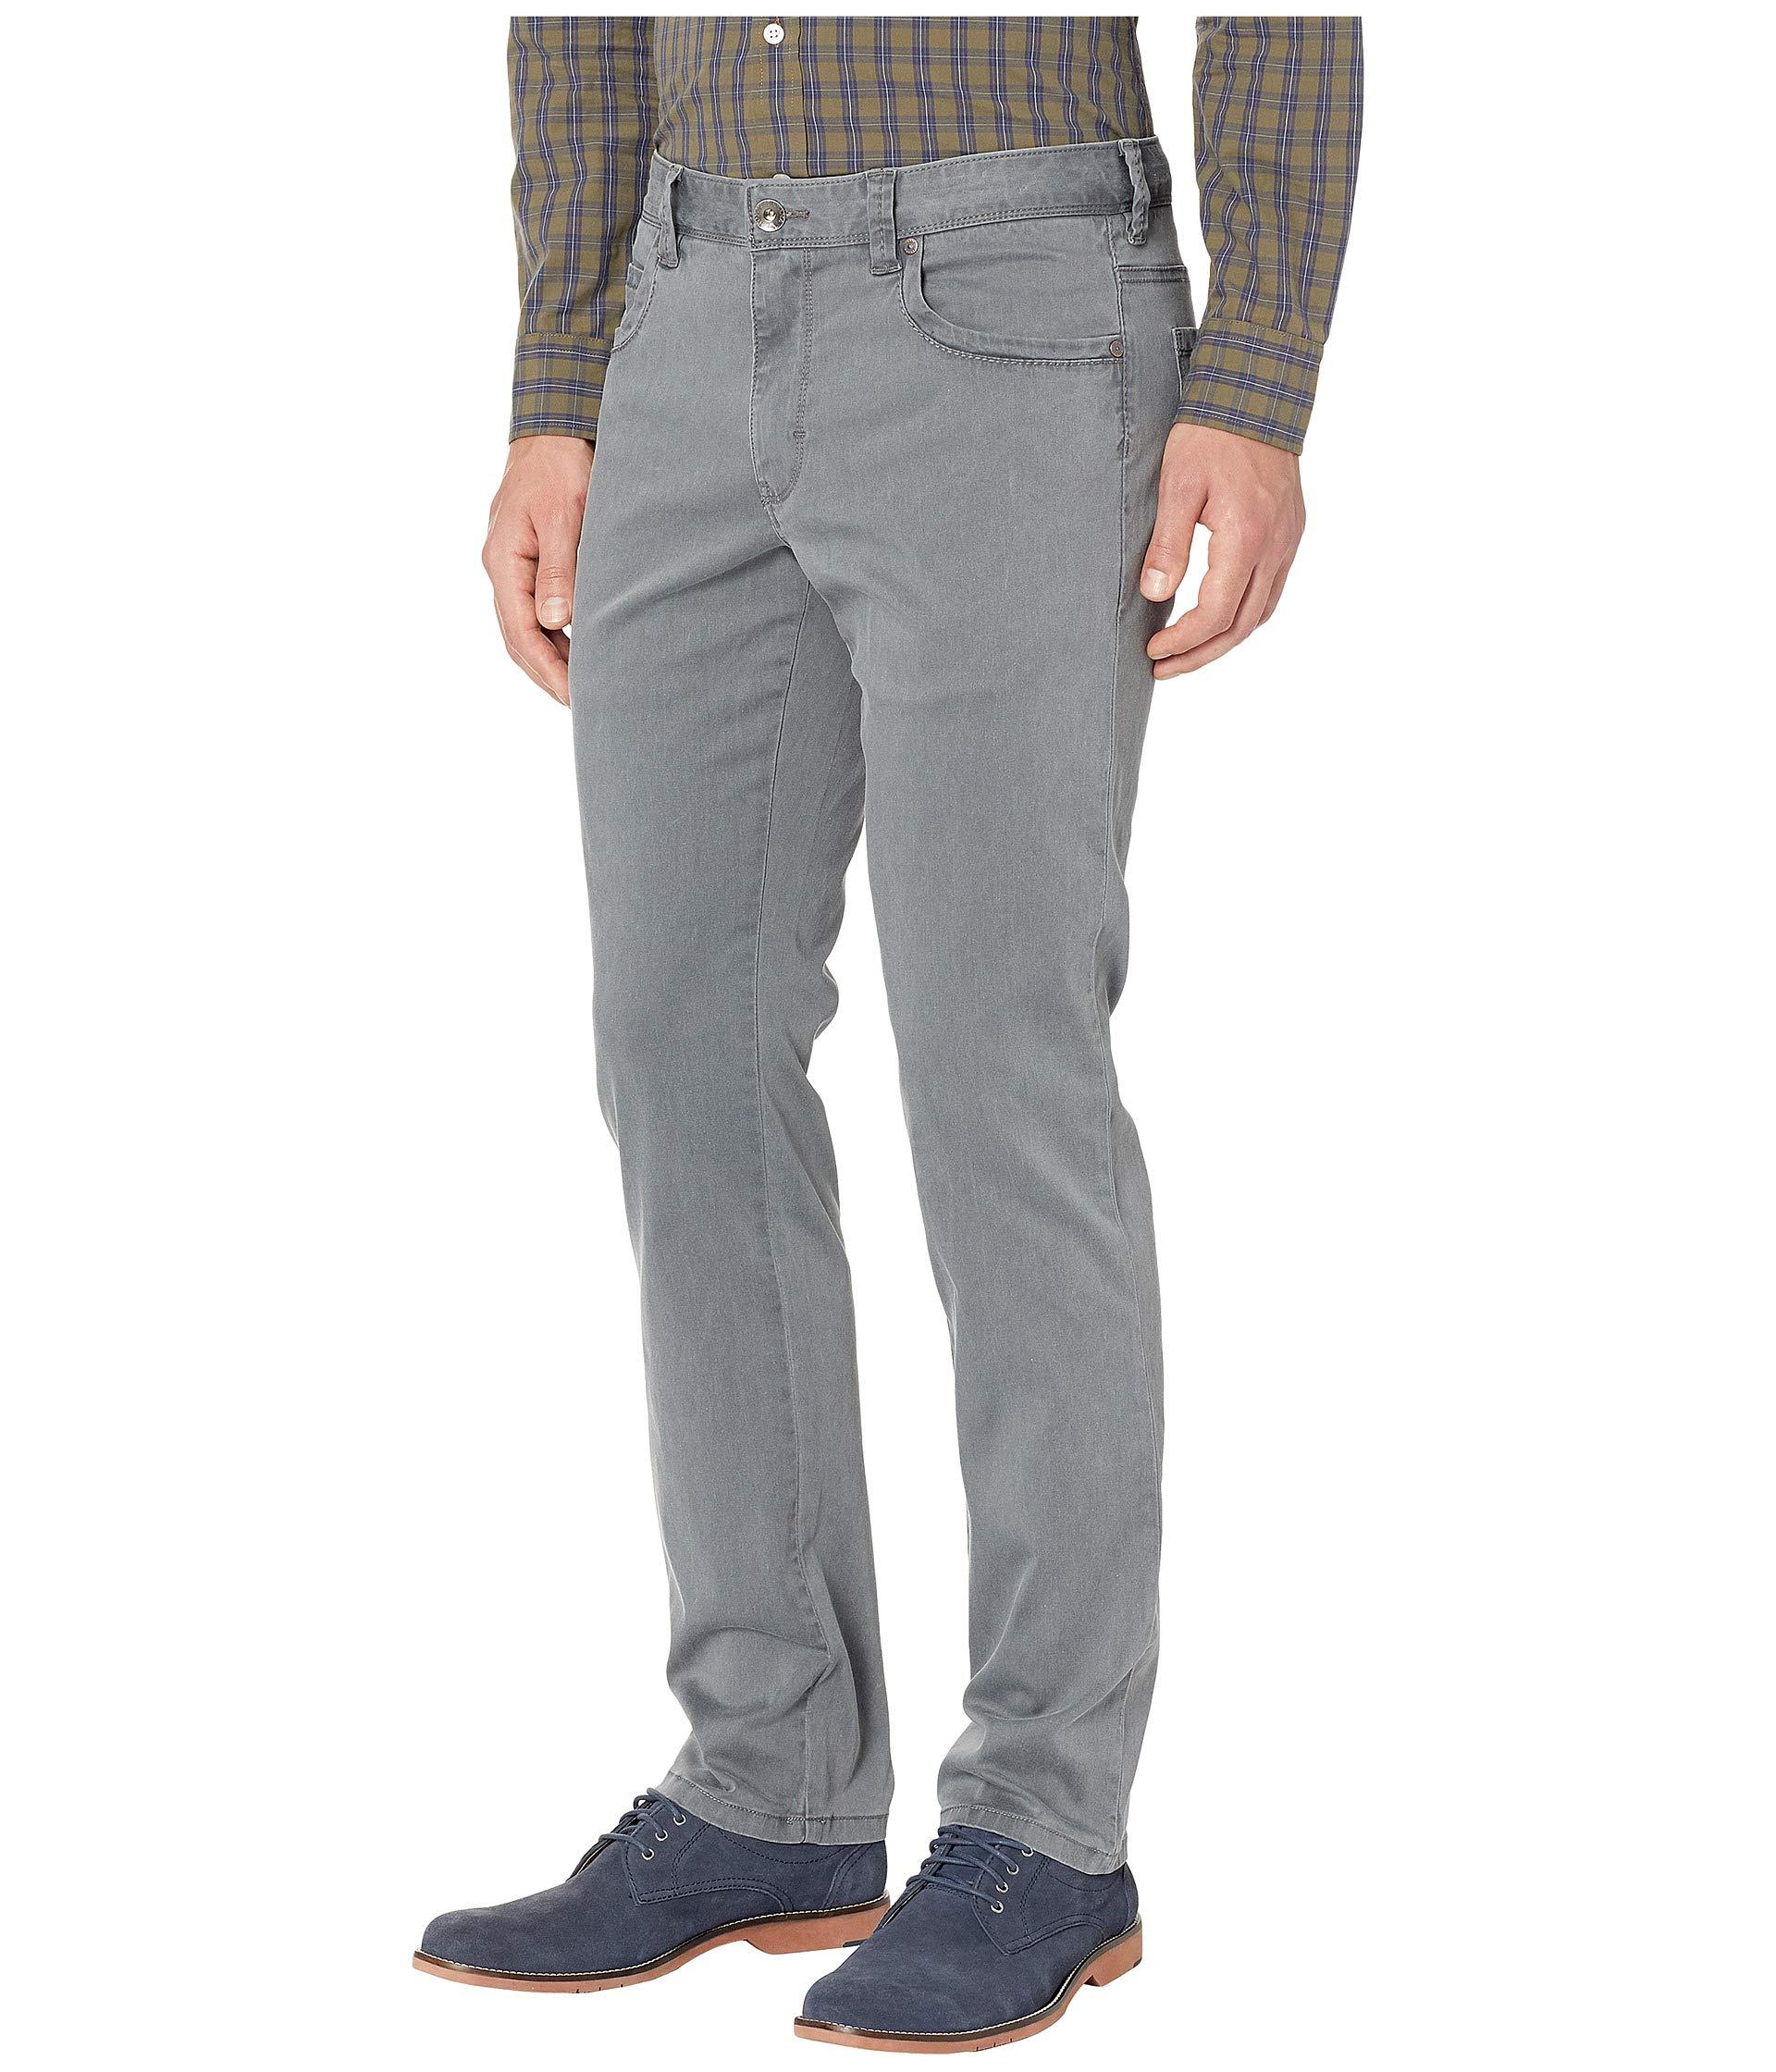 Tommy Bahama Denim Boracay Five-pocket Chino Pant in Gray for Men - Lyst